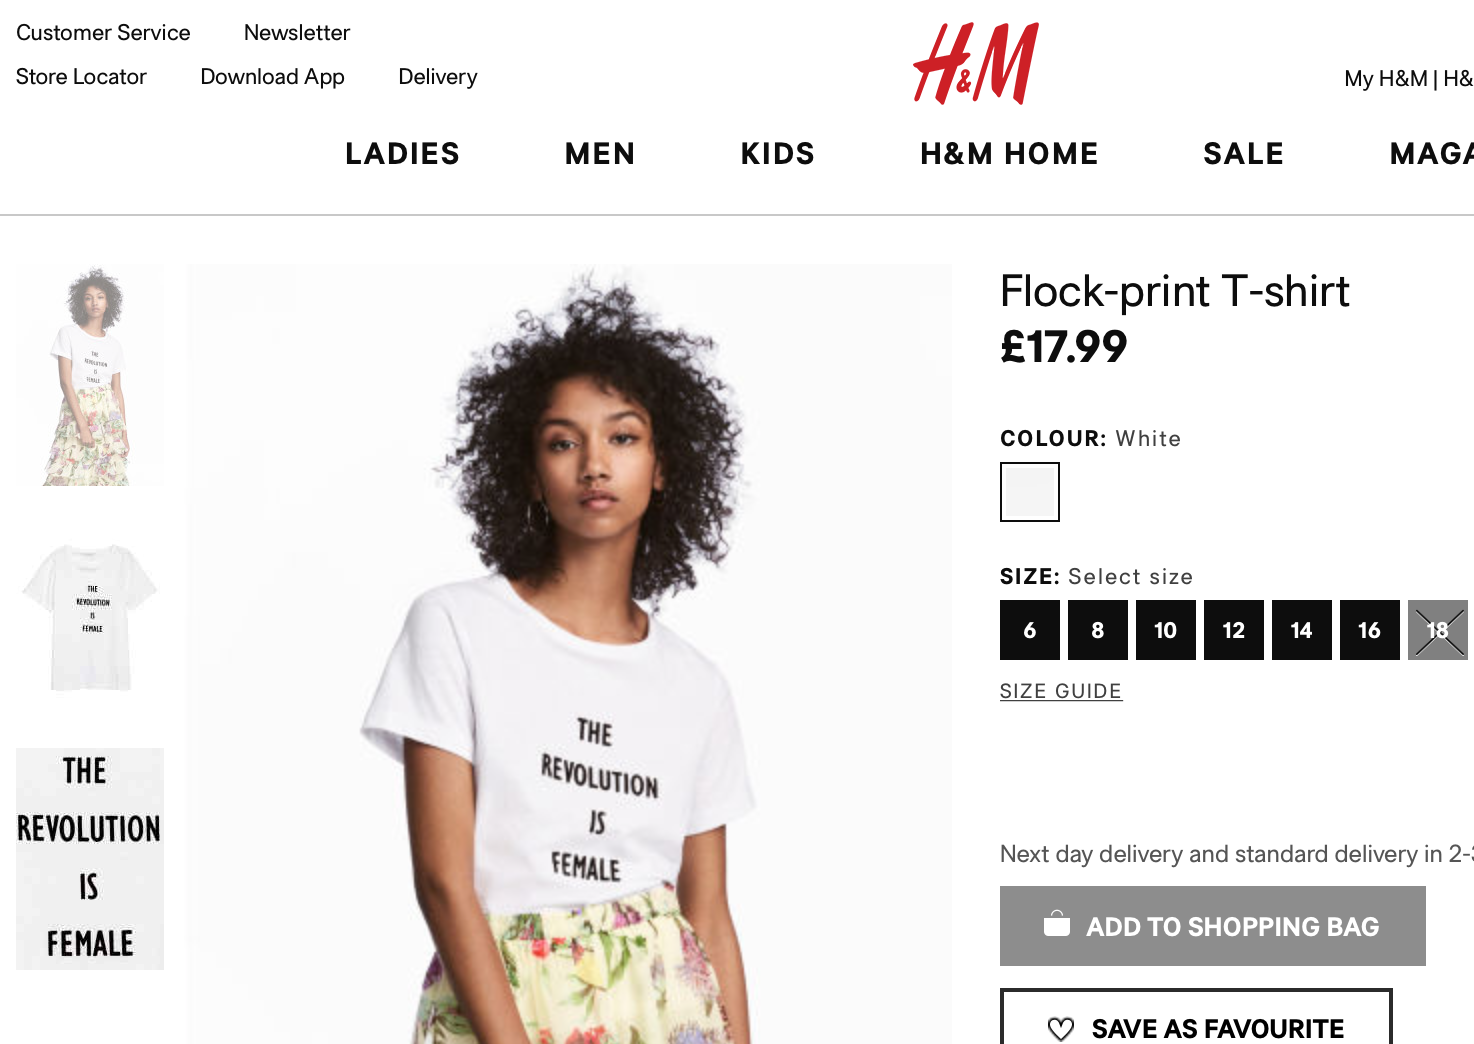 H&M The Revolution is Female T-shirt